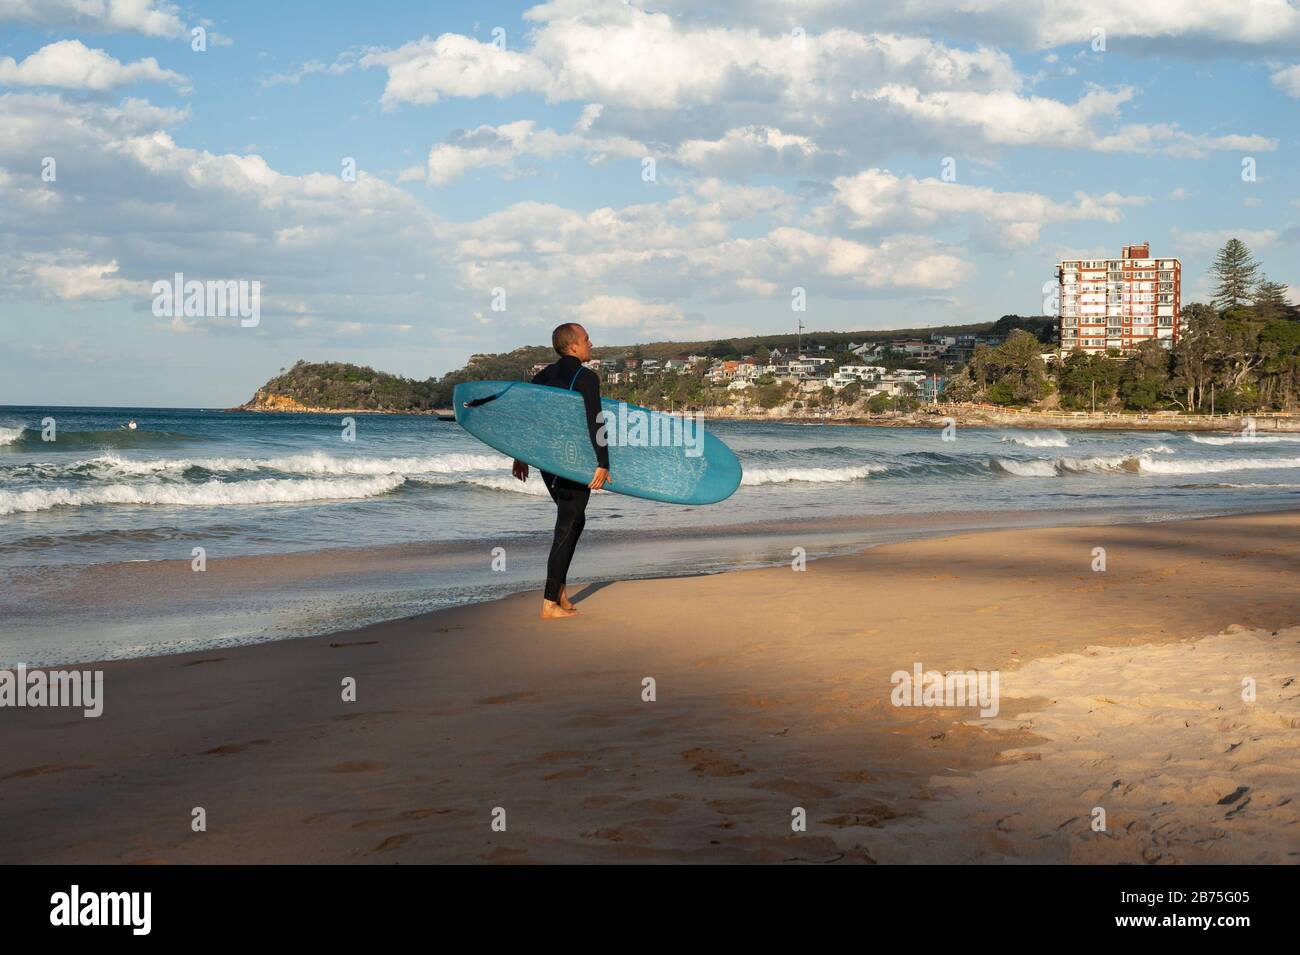 10.05.2018, Sydney, New South Wales, Australia - A man walks along Manly beach with his surfboard under his arm while other surfers are waiting in the background for the right wave. [automated translation] Stock Photo